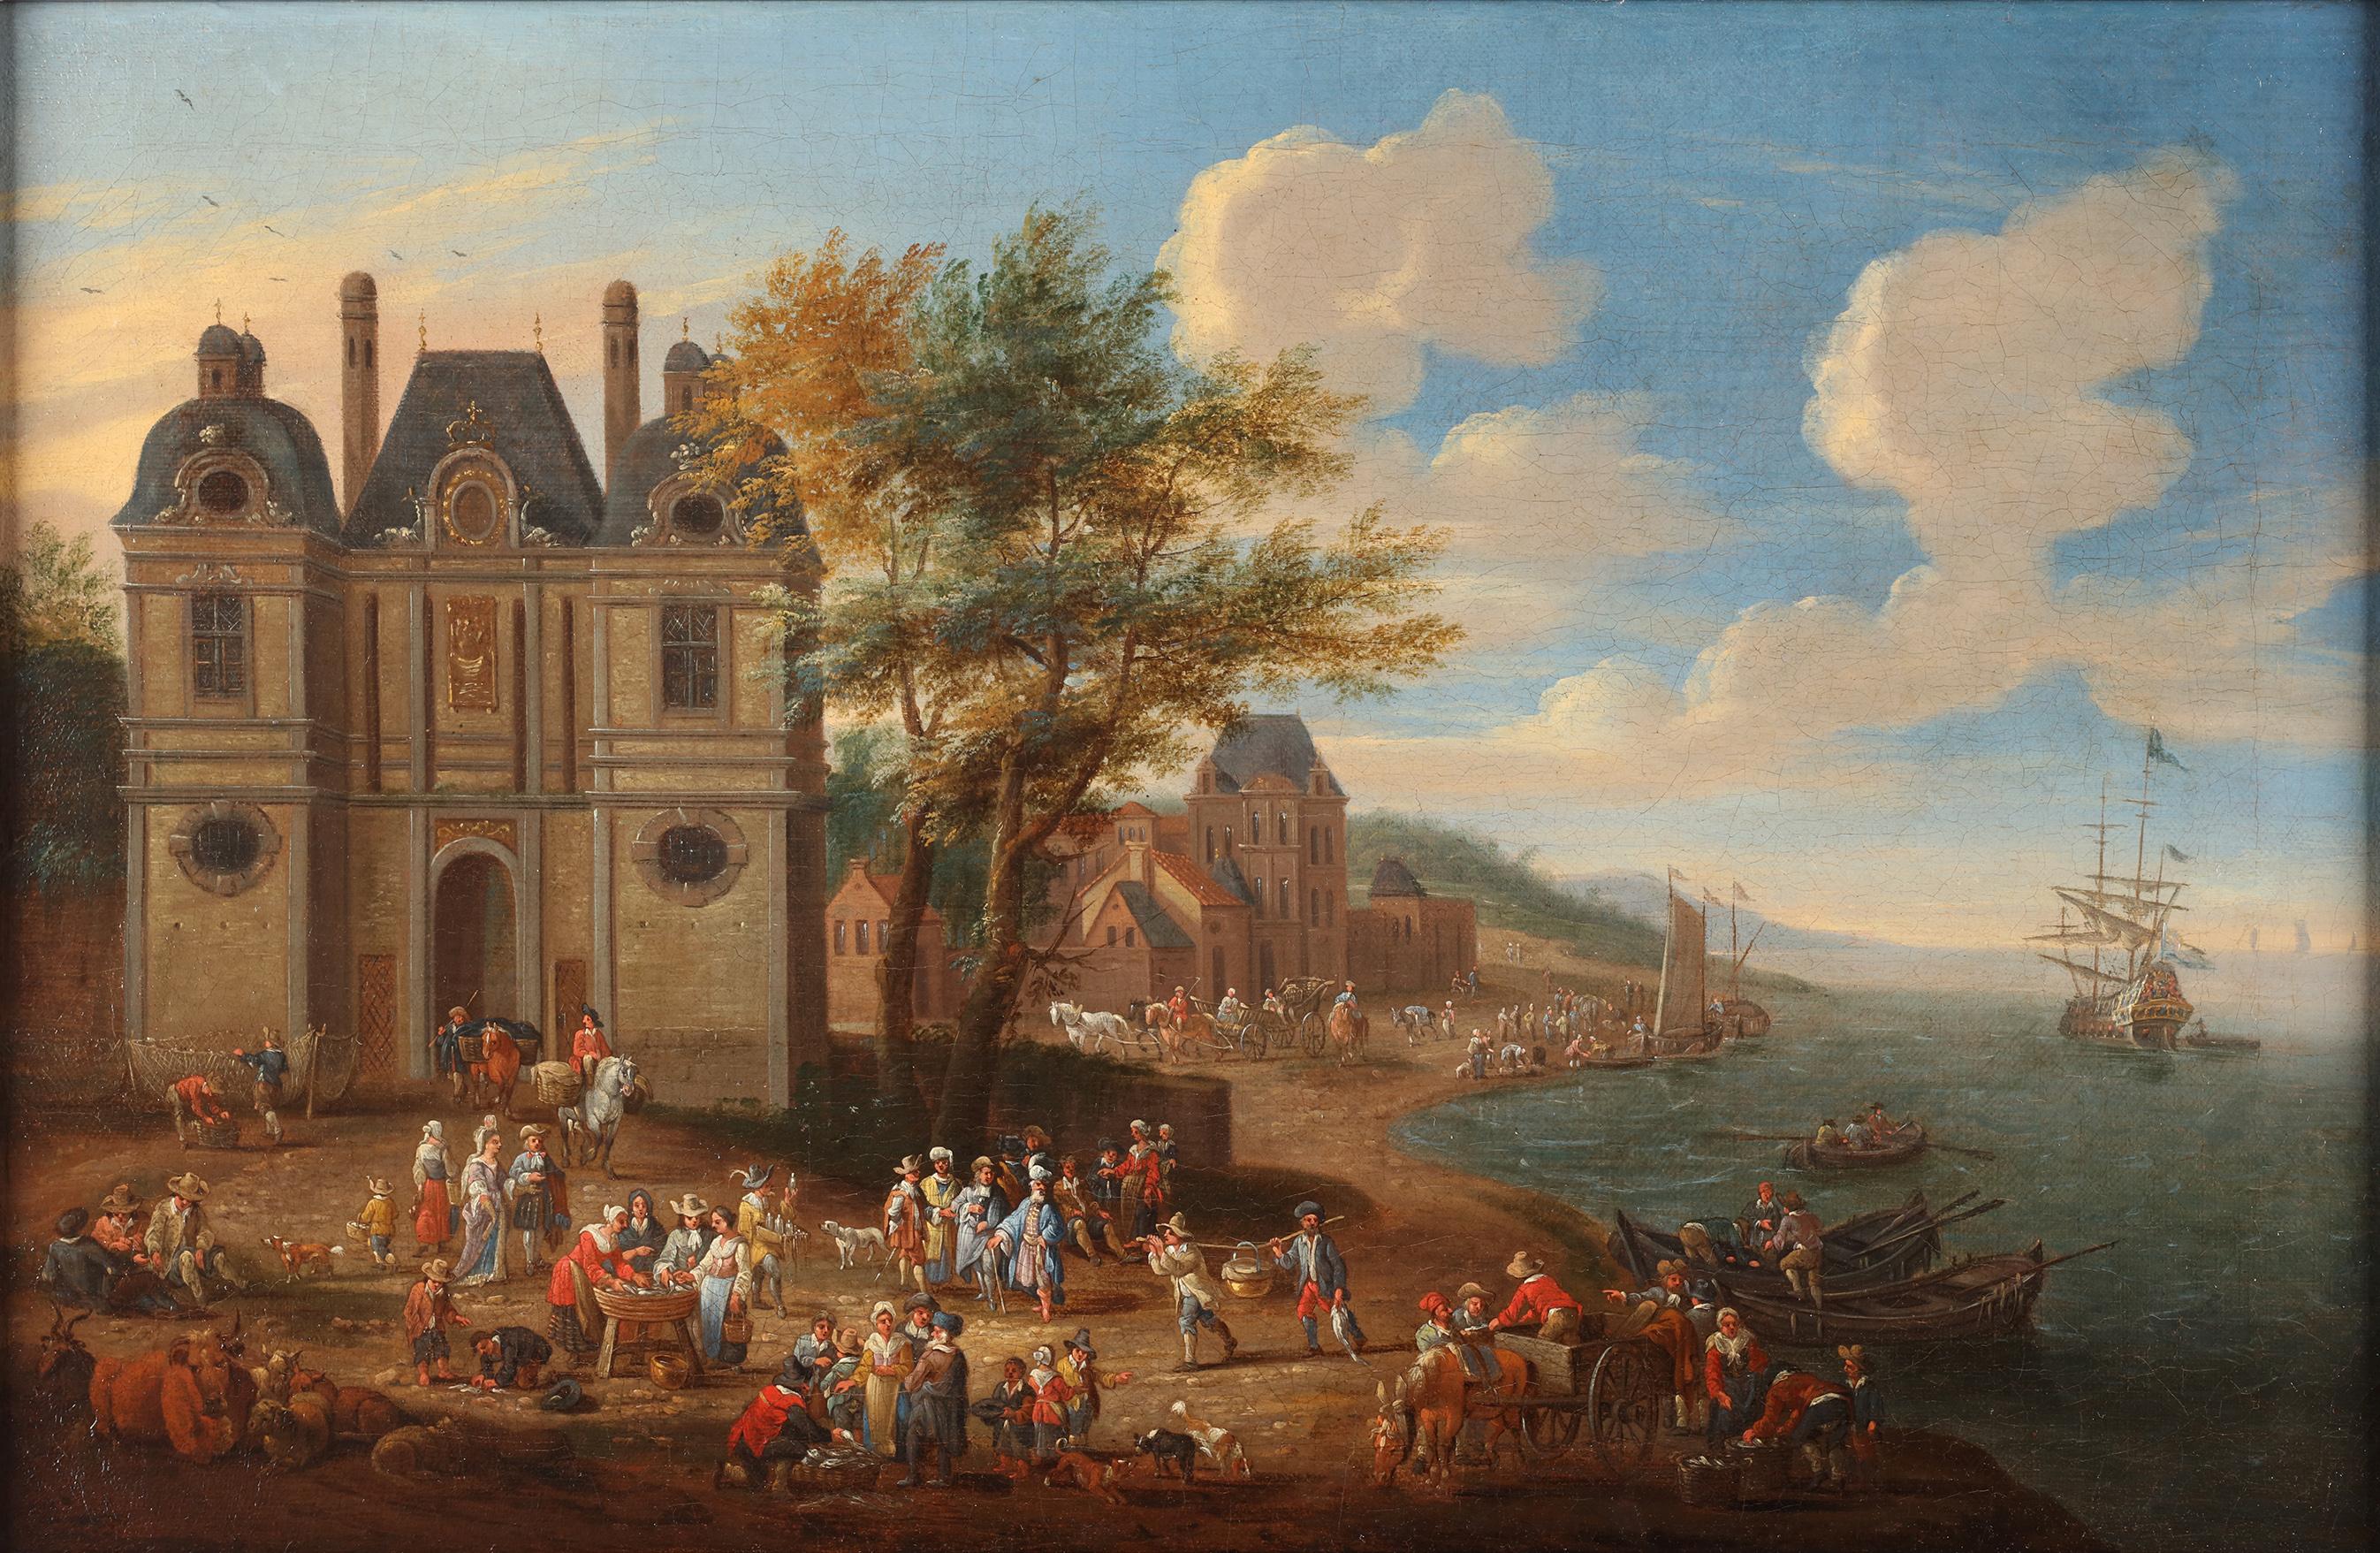 Two scenes showing a fish market in front of a town - Mathijs Schoevaerdts - Flemish School Painting by Matthijs Schoevaerdts